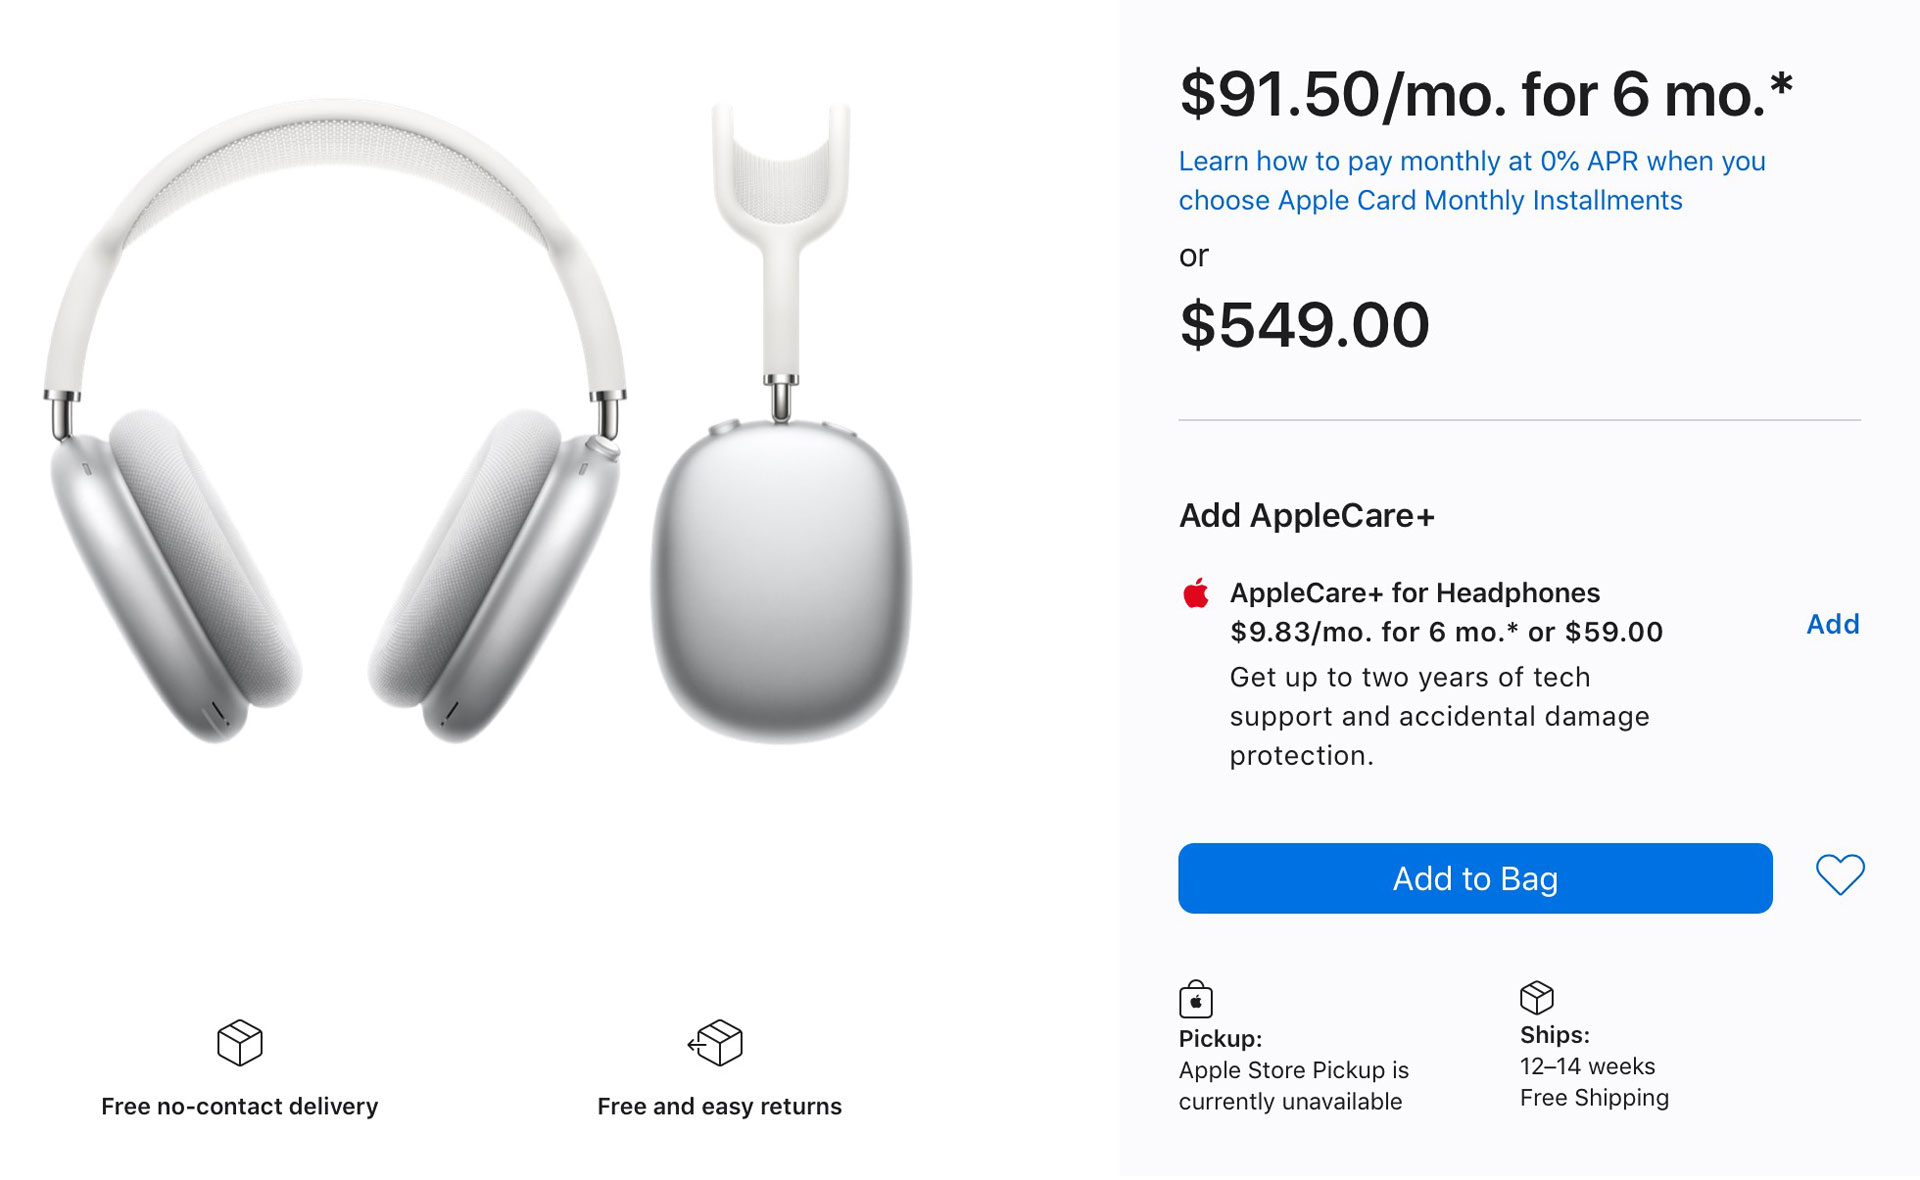 AirPods Max won't be delivered until March 2021 in the USA.